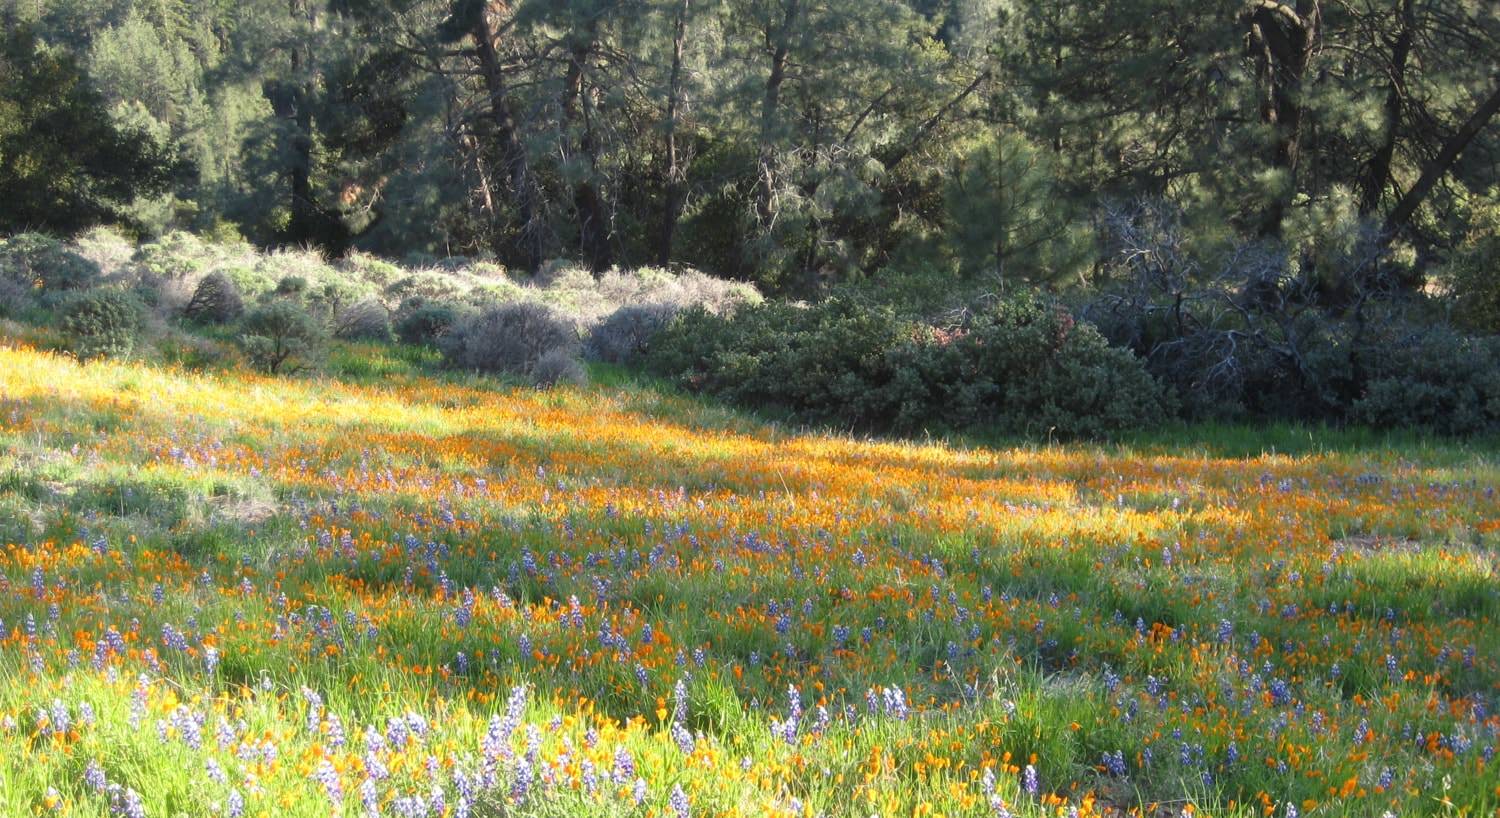 Field of wildflowers growing with grasses and trees in the background